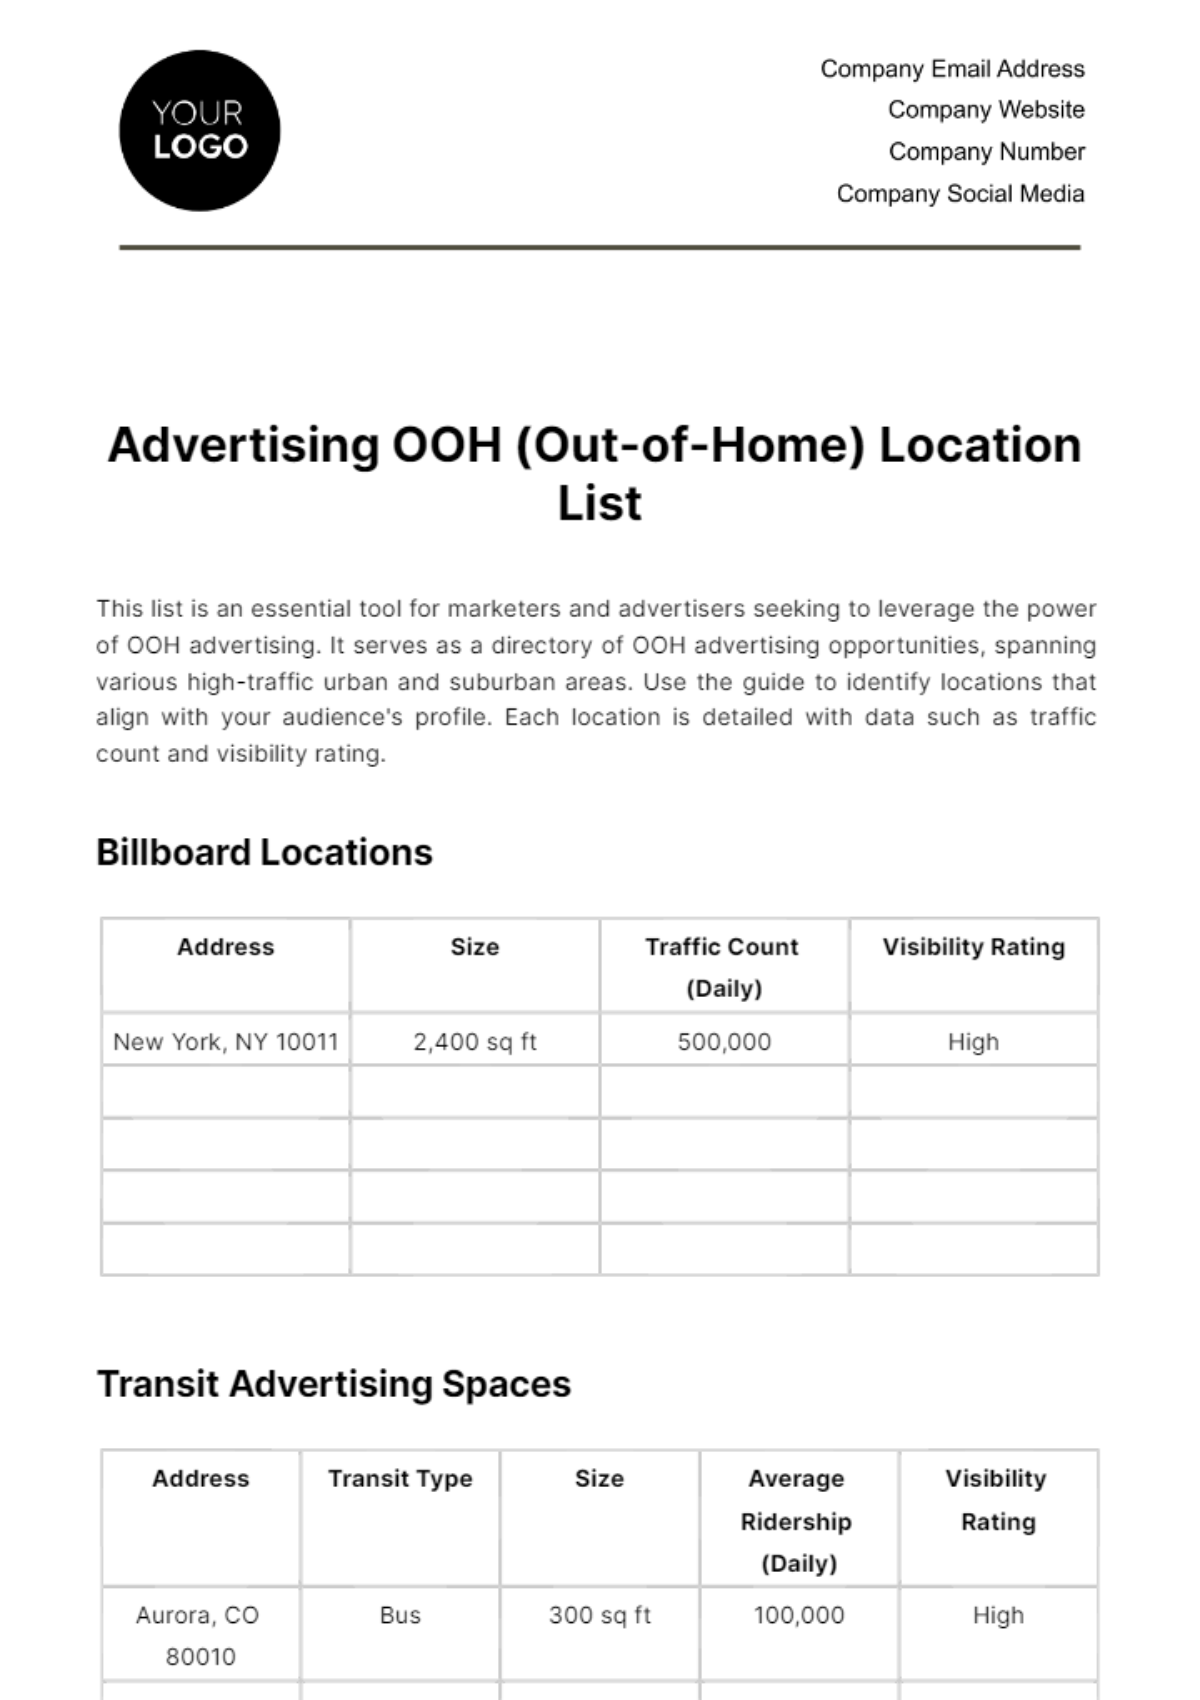 Free Advertising OOH (Out-of-Home) Location List Template